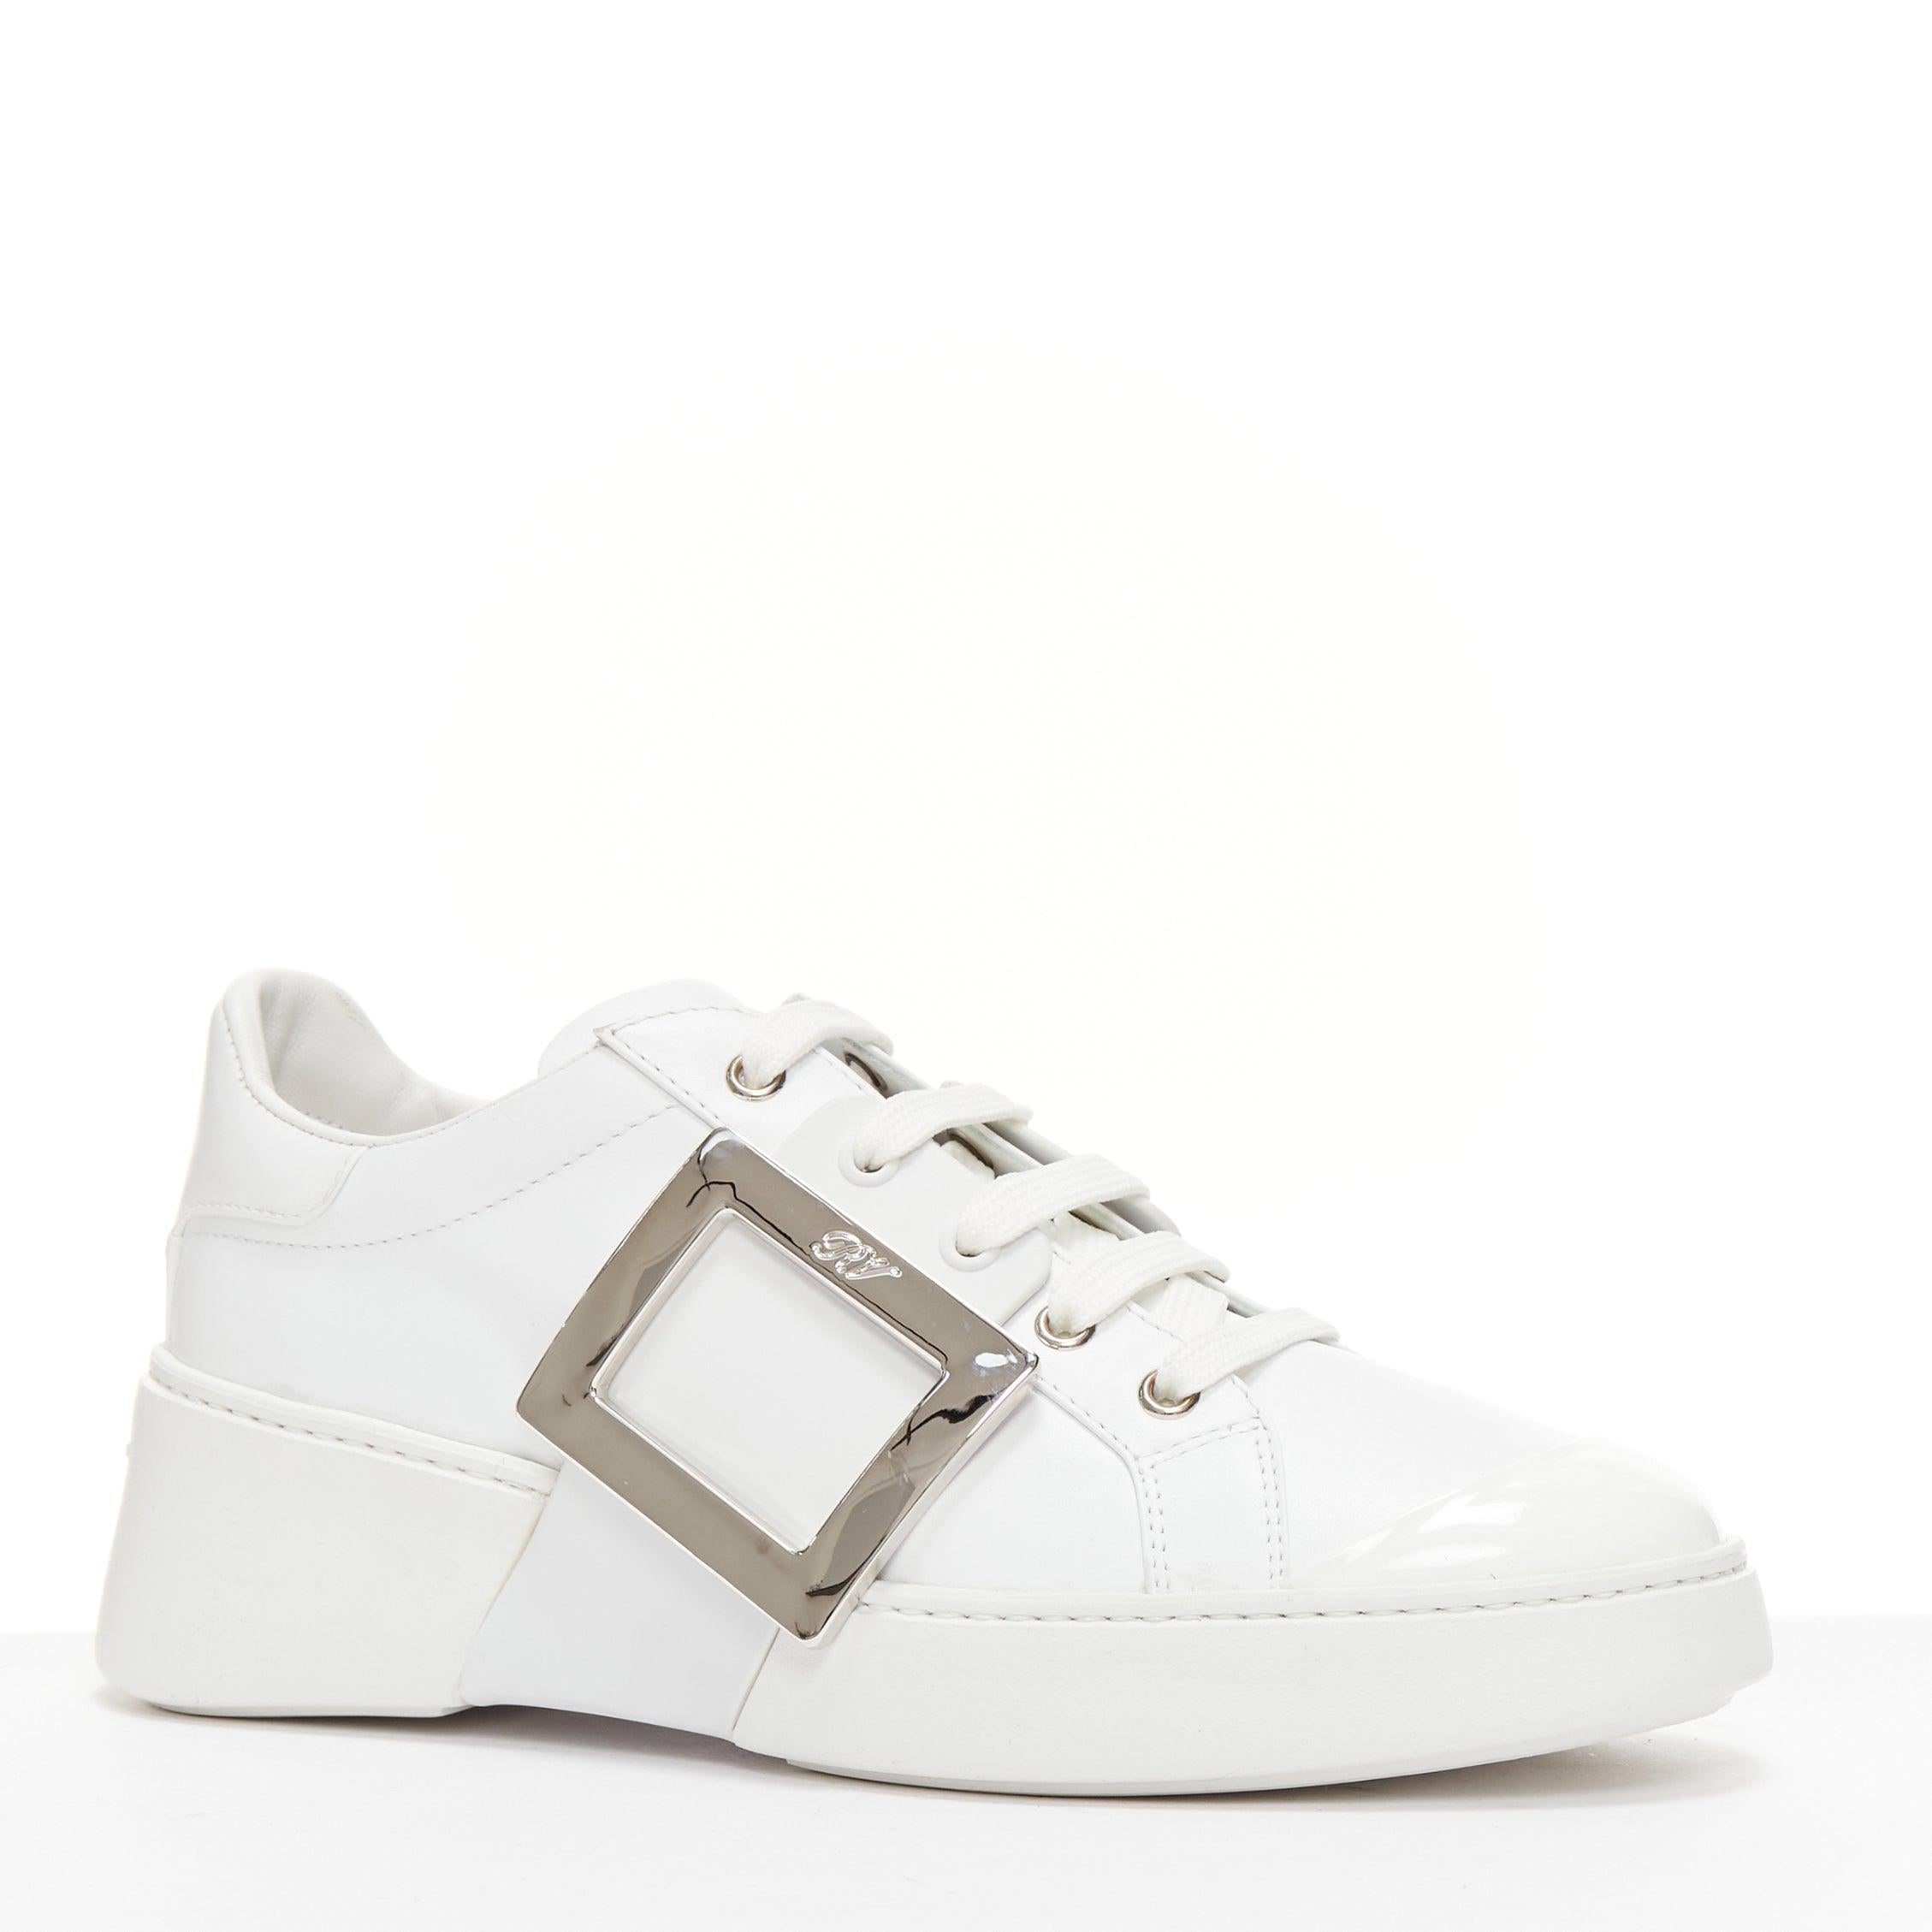 ROGER VIVIER Viv Skate white patent silver RV buckle sneakers EU38.5
Reference: AAWC/A01167
Brand: Roger Vivier
Model: Viv Skate
Material: Leather, Patent Leather
Color: White, Silver
Pattern: Solid
Closure: Lace Up
Lining: White Leather
Extra